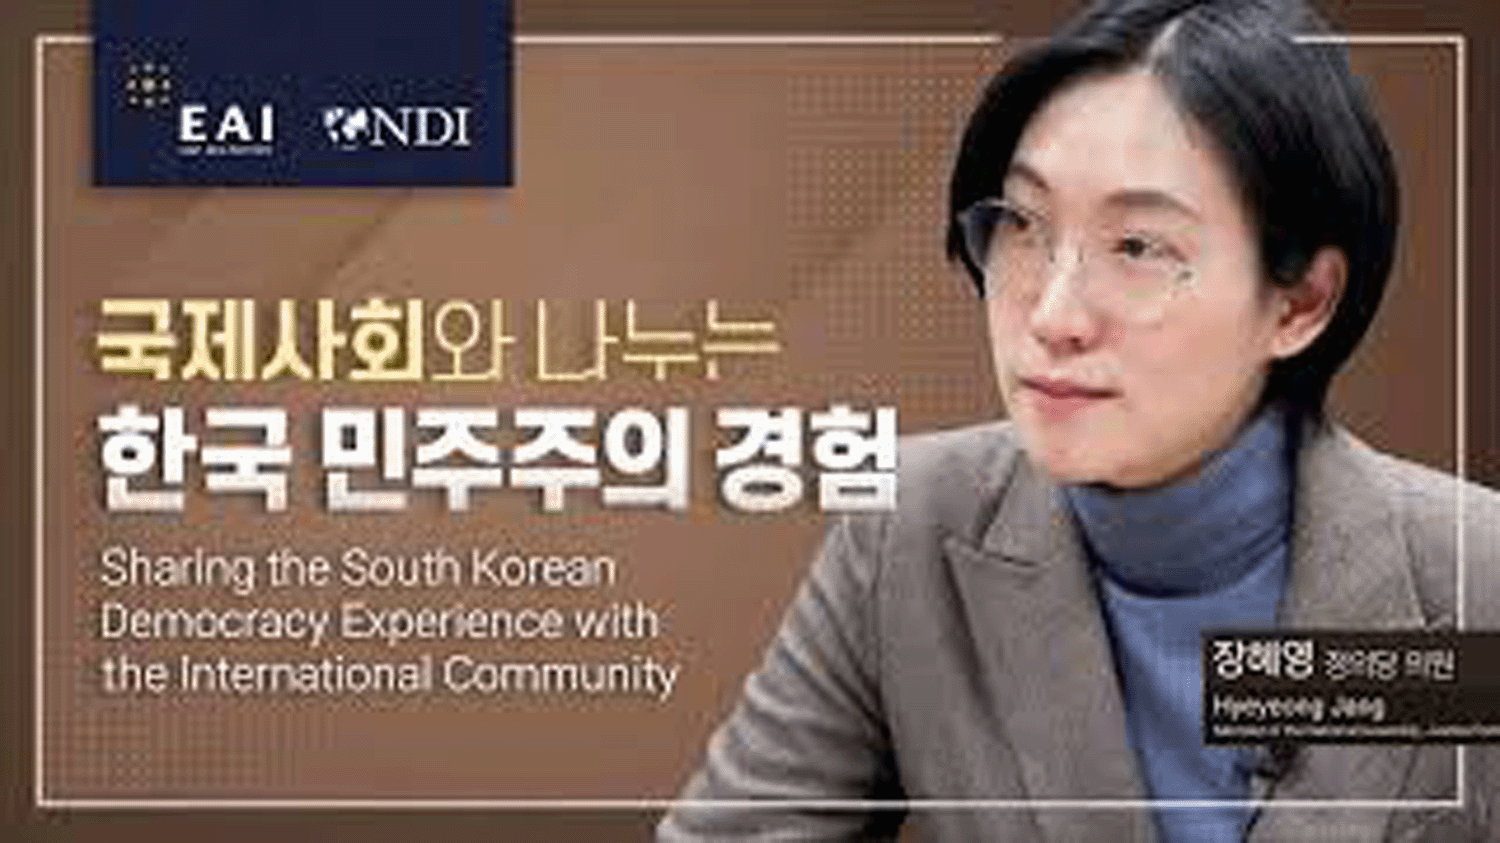 [Democracy Cooperation] Sharing the South Korean Democracy Experience with the International Community Interview I. Hyeyeong Jang